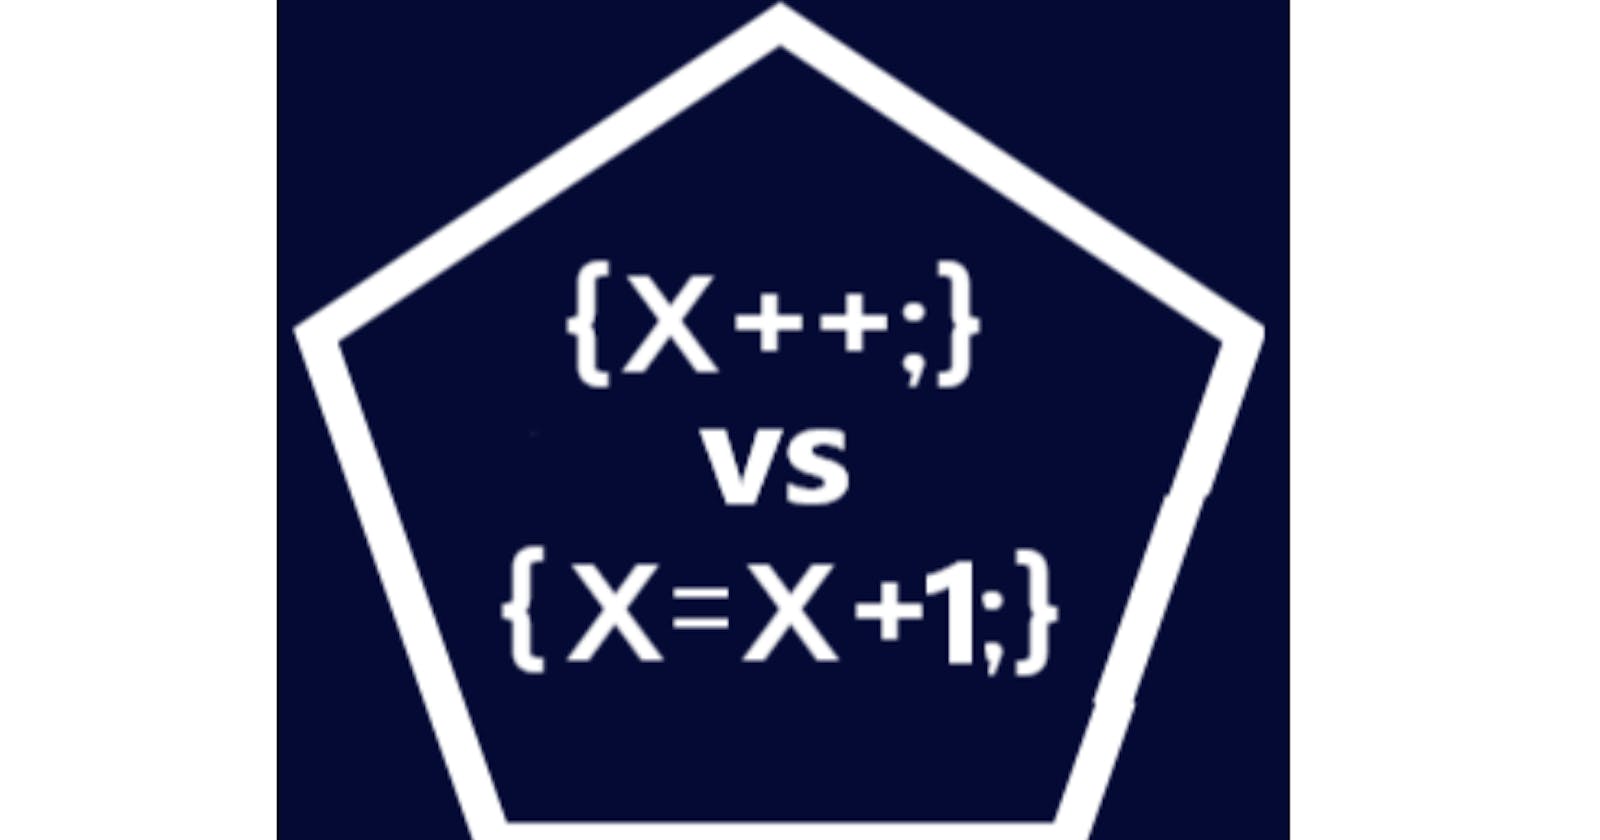 Difference between x++ and x+1